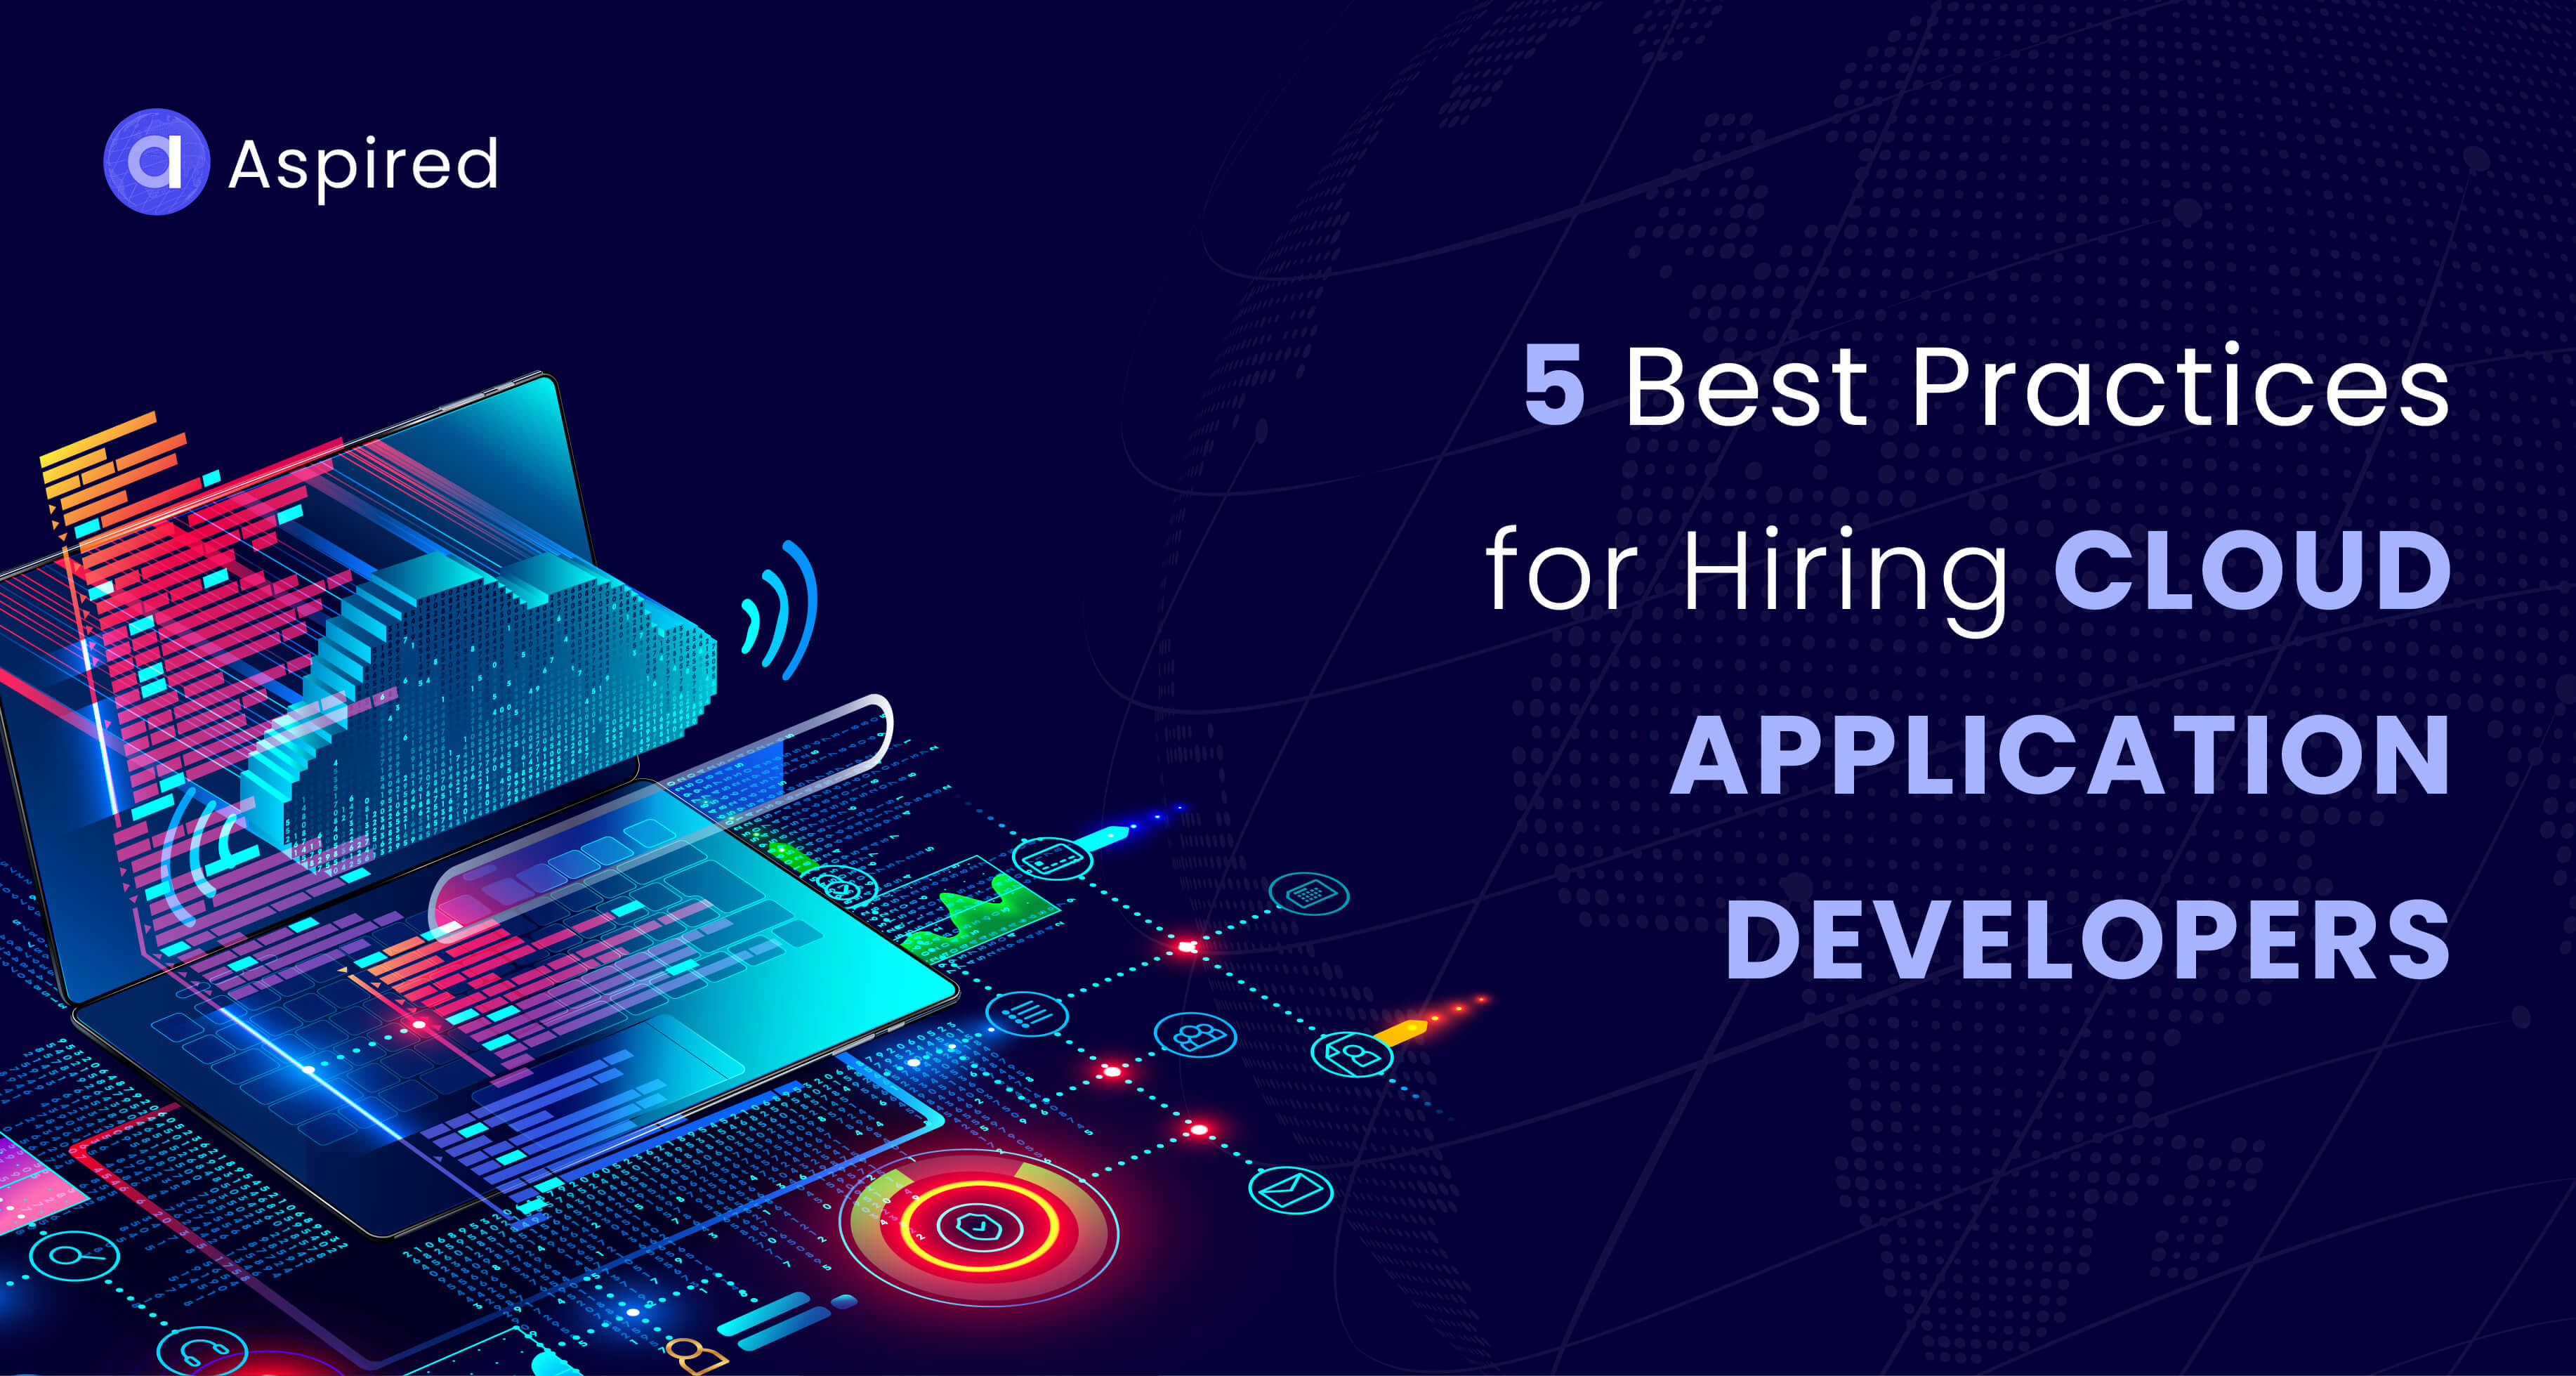 5 Best Practices for Hiring Cloud Application Developers